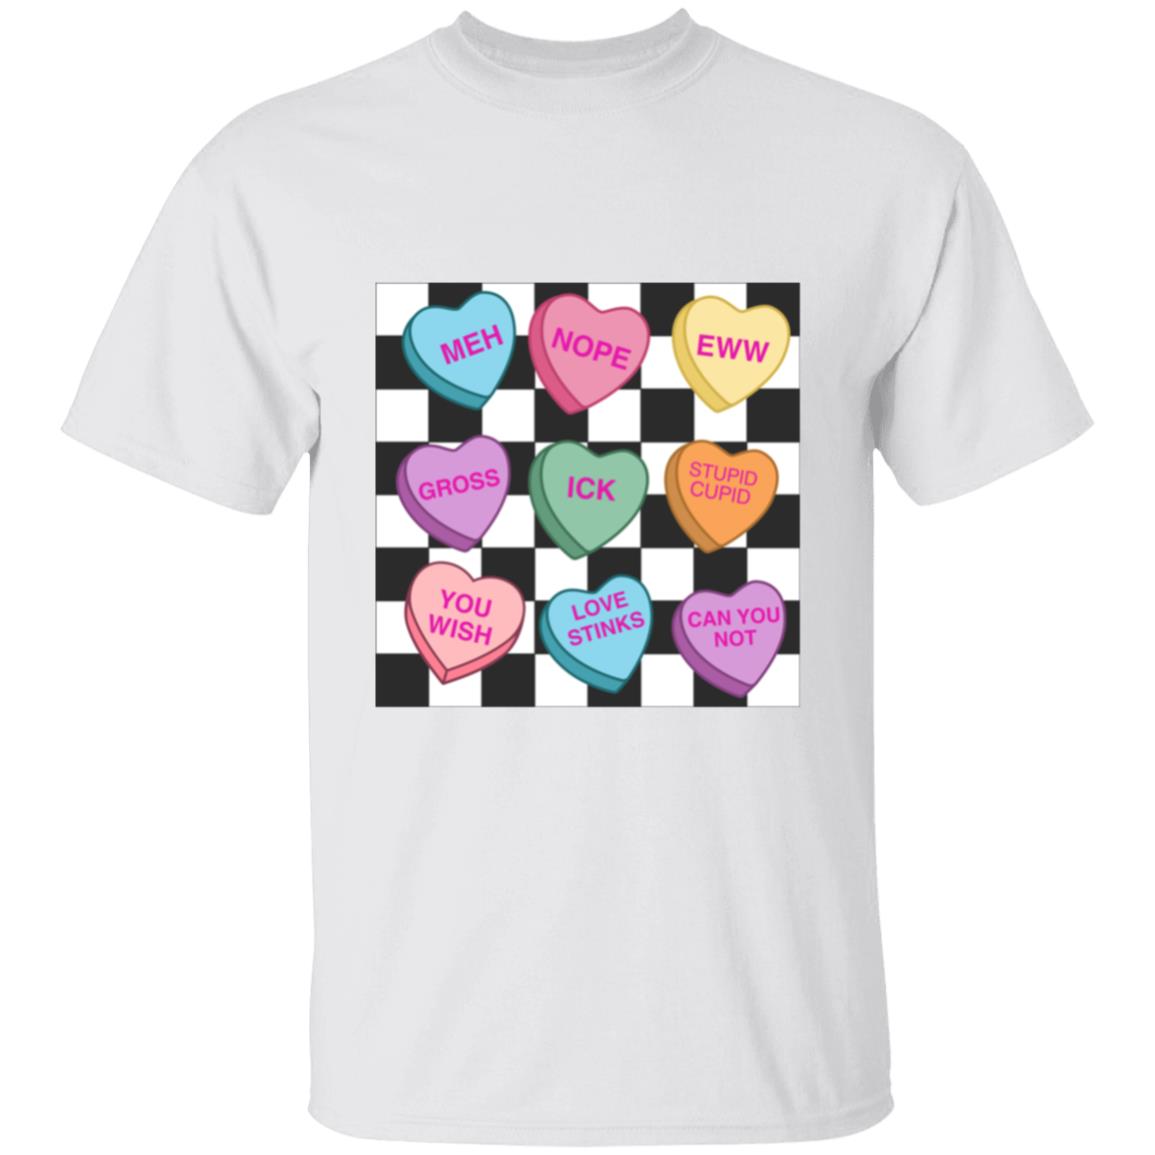 Get trendy with anti valentines candy sweatshirt Anti-Valentines Day Conversation Hearts Apparel - Apparel available at Good Gift Company. Grab yours for $21 today!